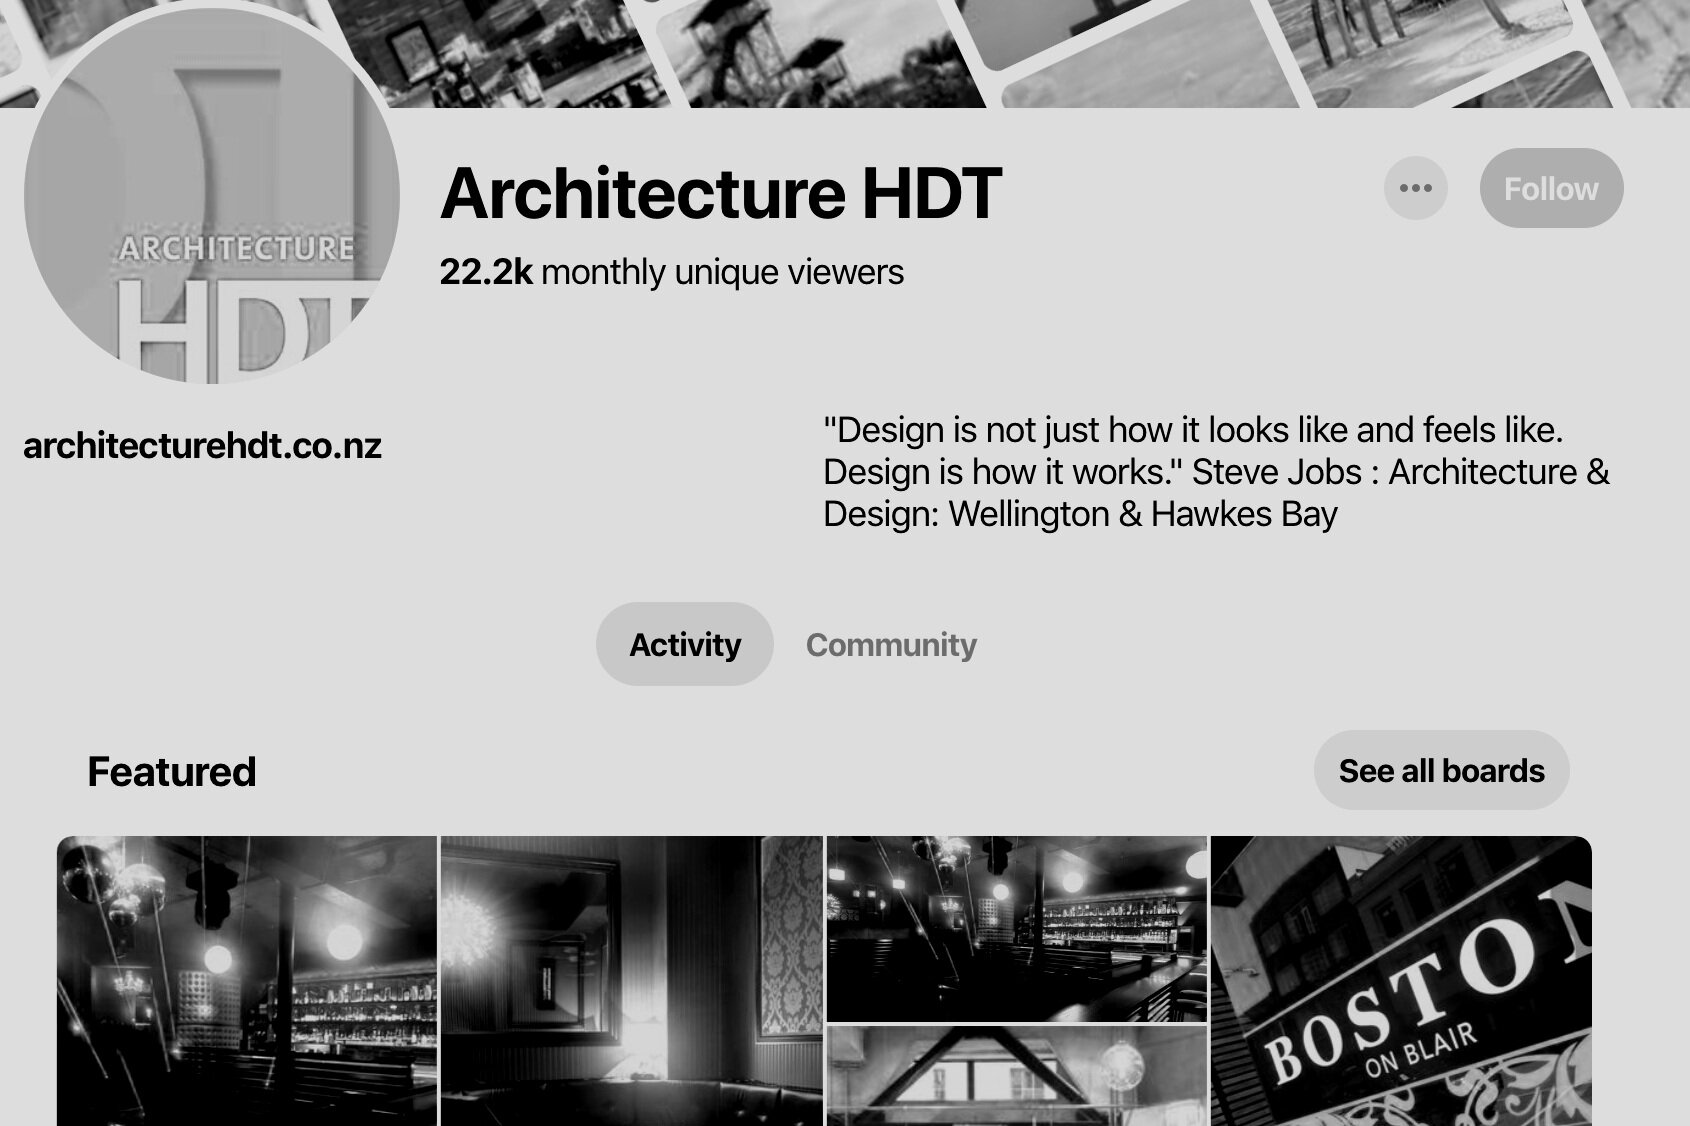 The Digital Cafe has worked with Director of Architecture HDT